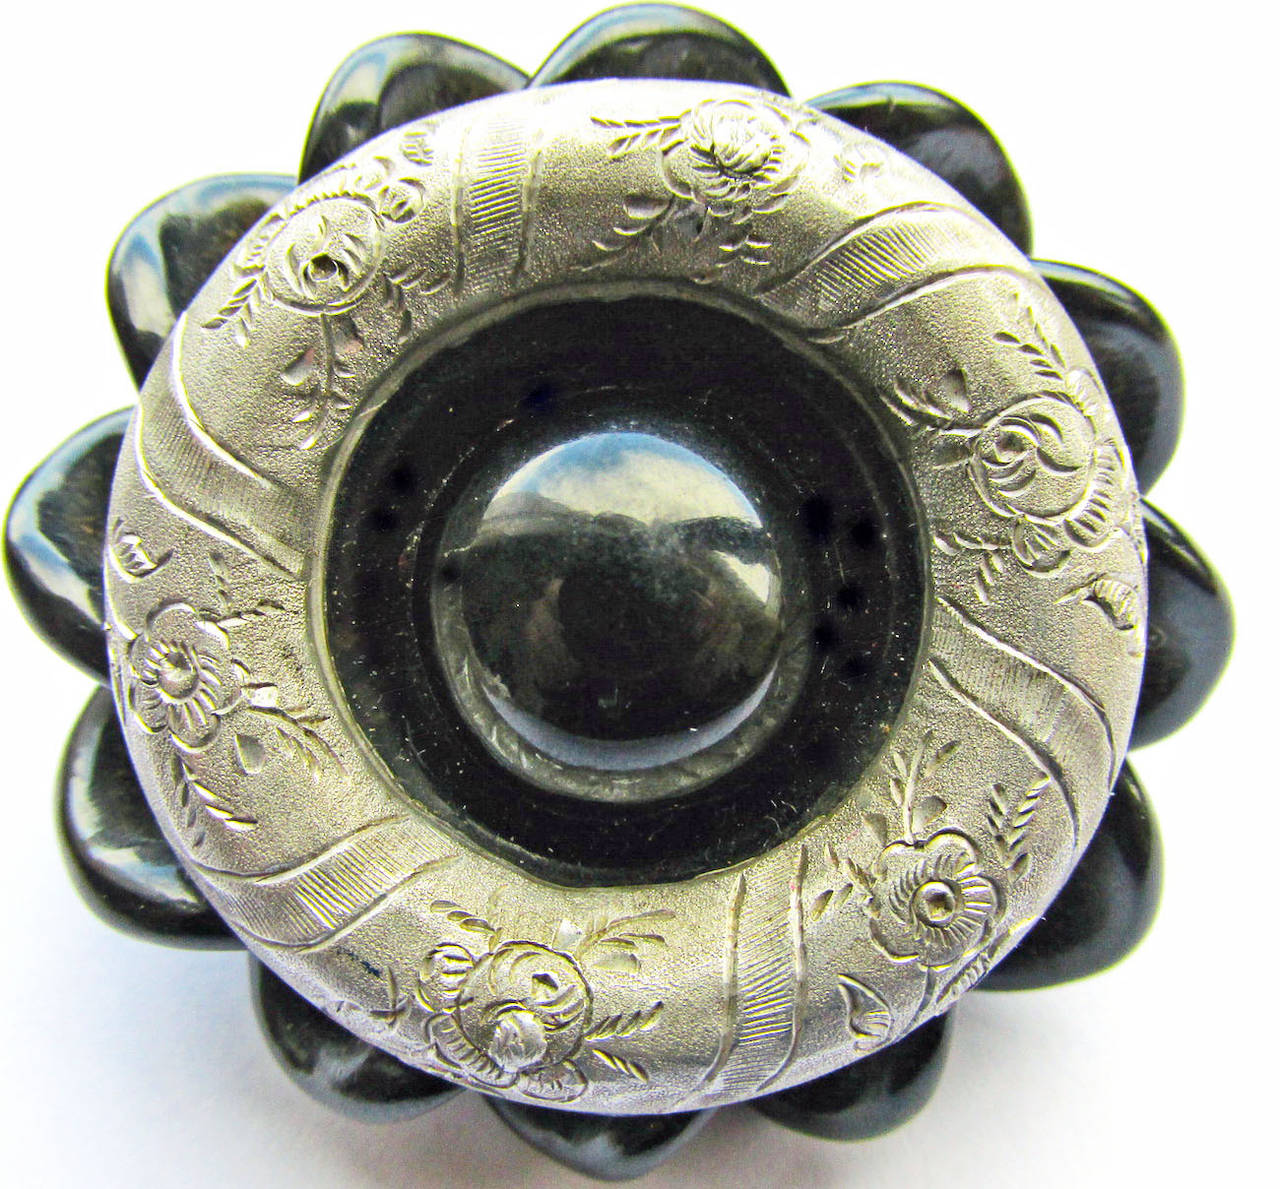 Striking Victorian Whitby jet and aluminium pin. This unique piece combines two of its period's most interesting materials. Whitby jet is a natural substance that is mined and then hand carved into jewelry and other objects. Aluminum was first made